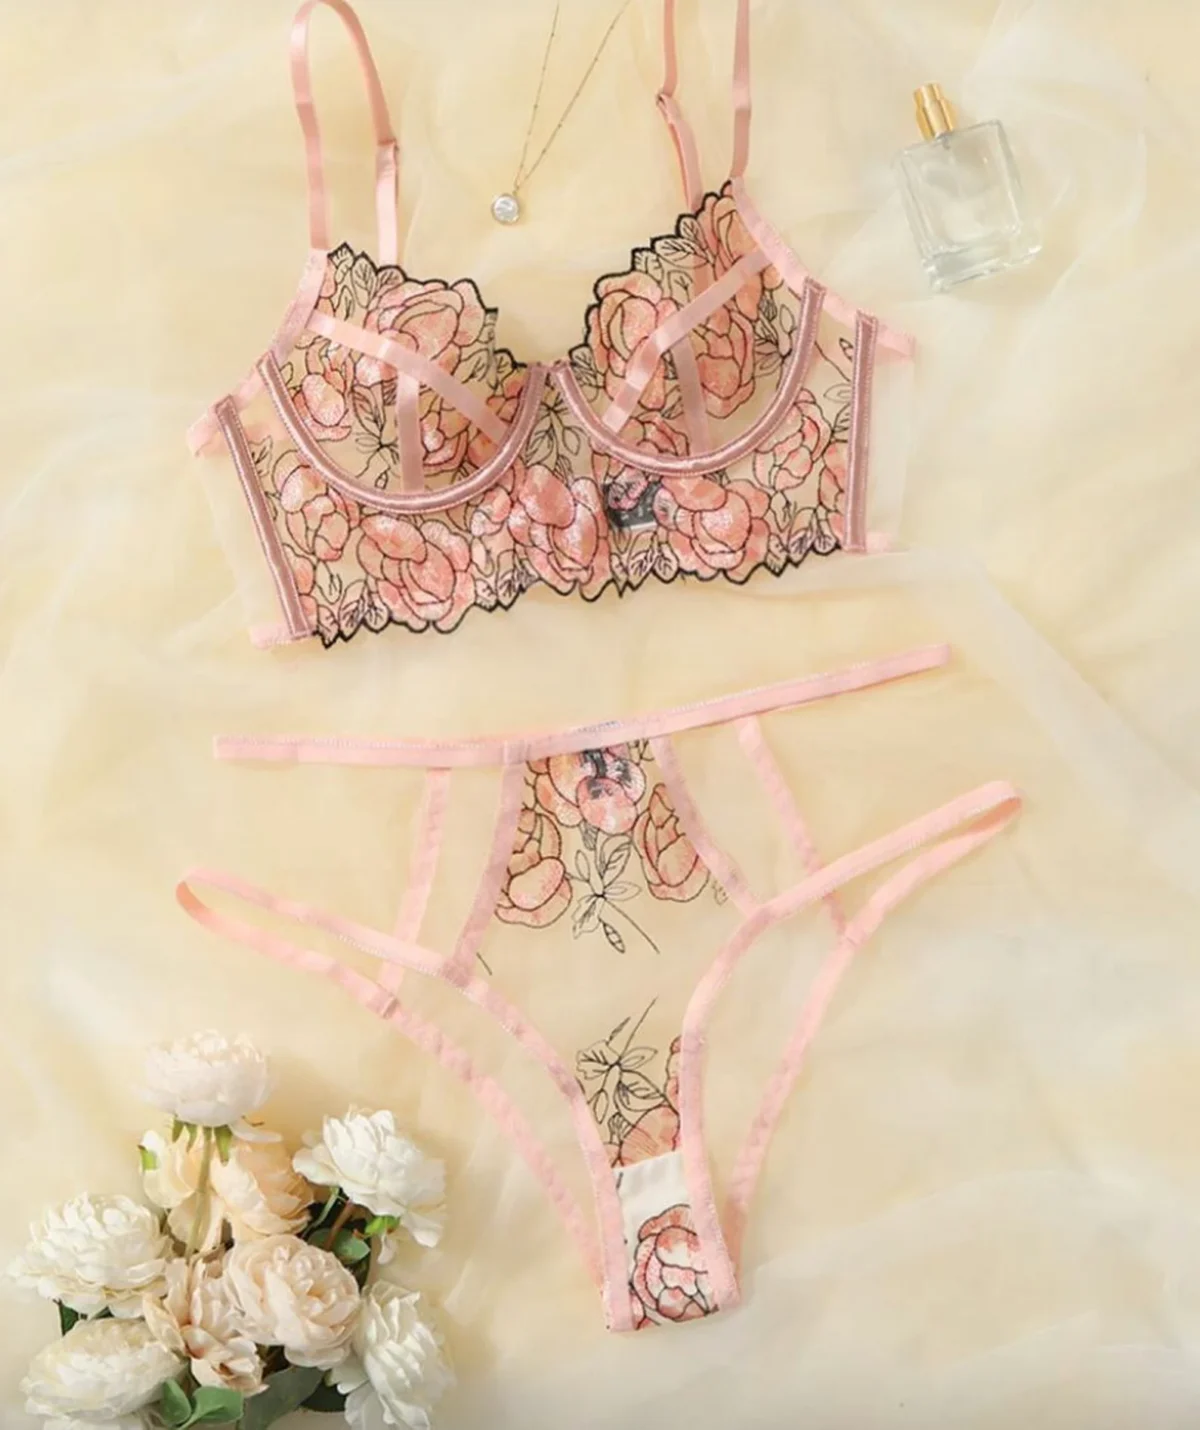 8 Sizzling Lingerie Sets To Instantly Surprise Your Partner on Valentines  Day! - Wedding Journal